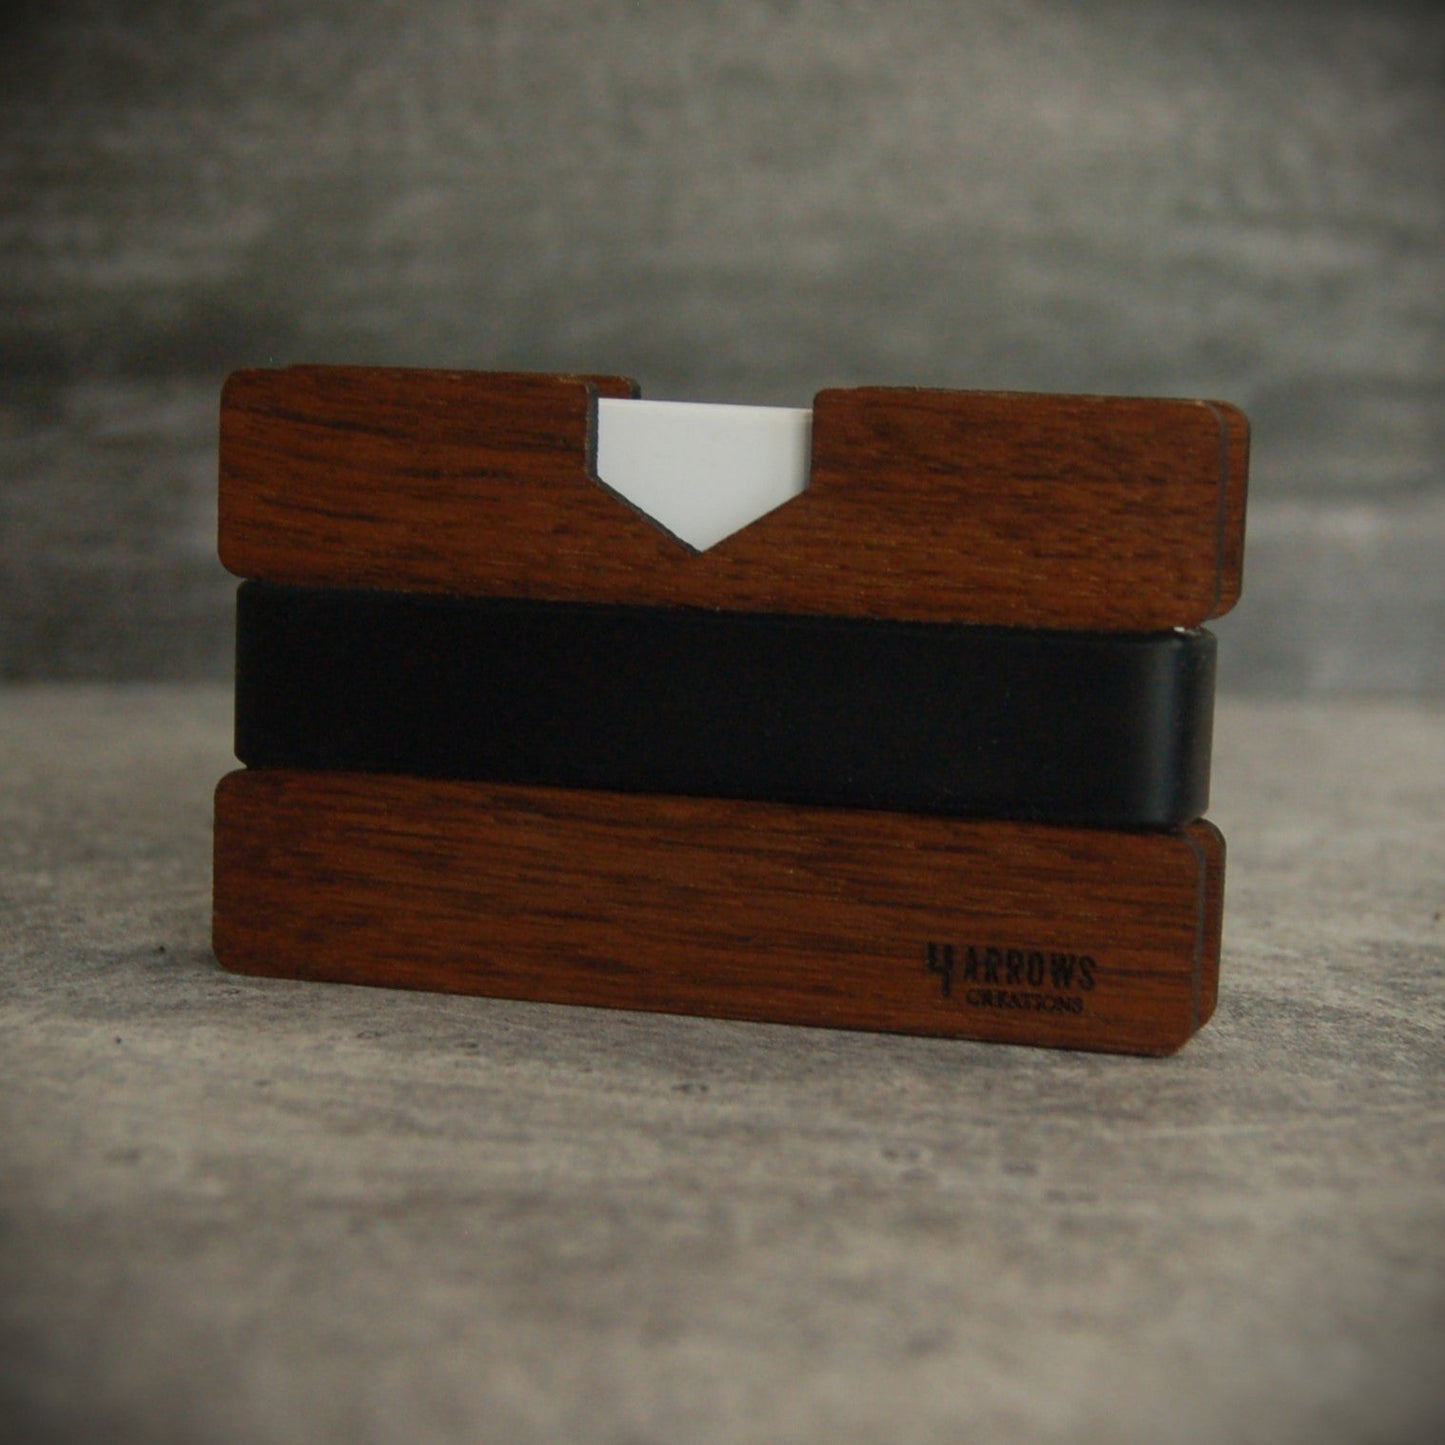 Minimalist Wood Wallet or Business Card Holder - 4 Arrows Creations